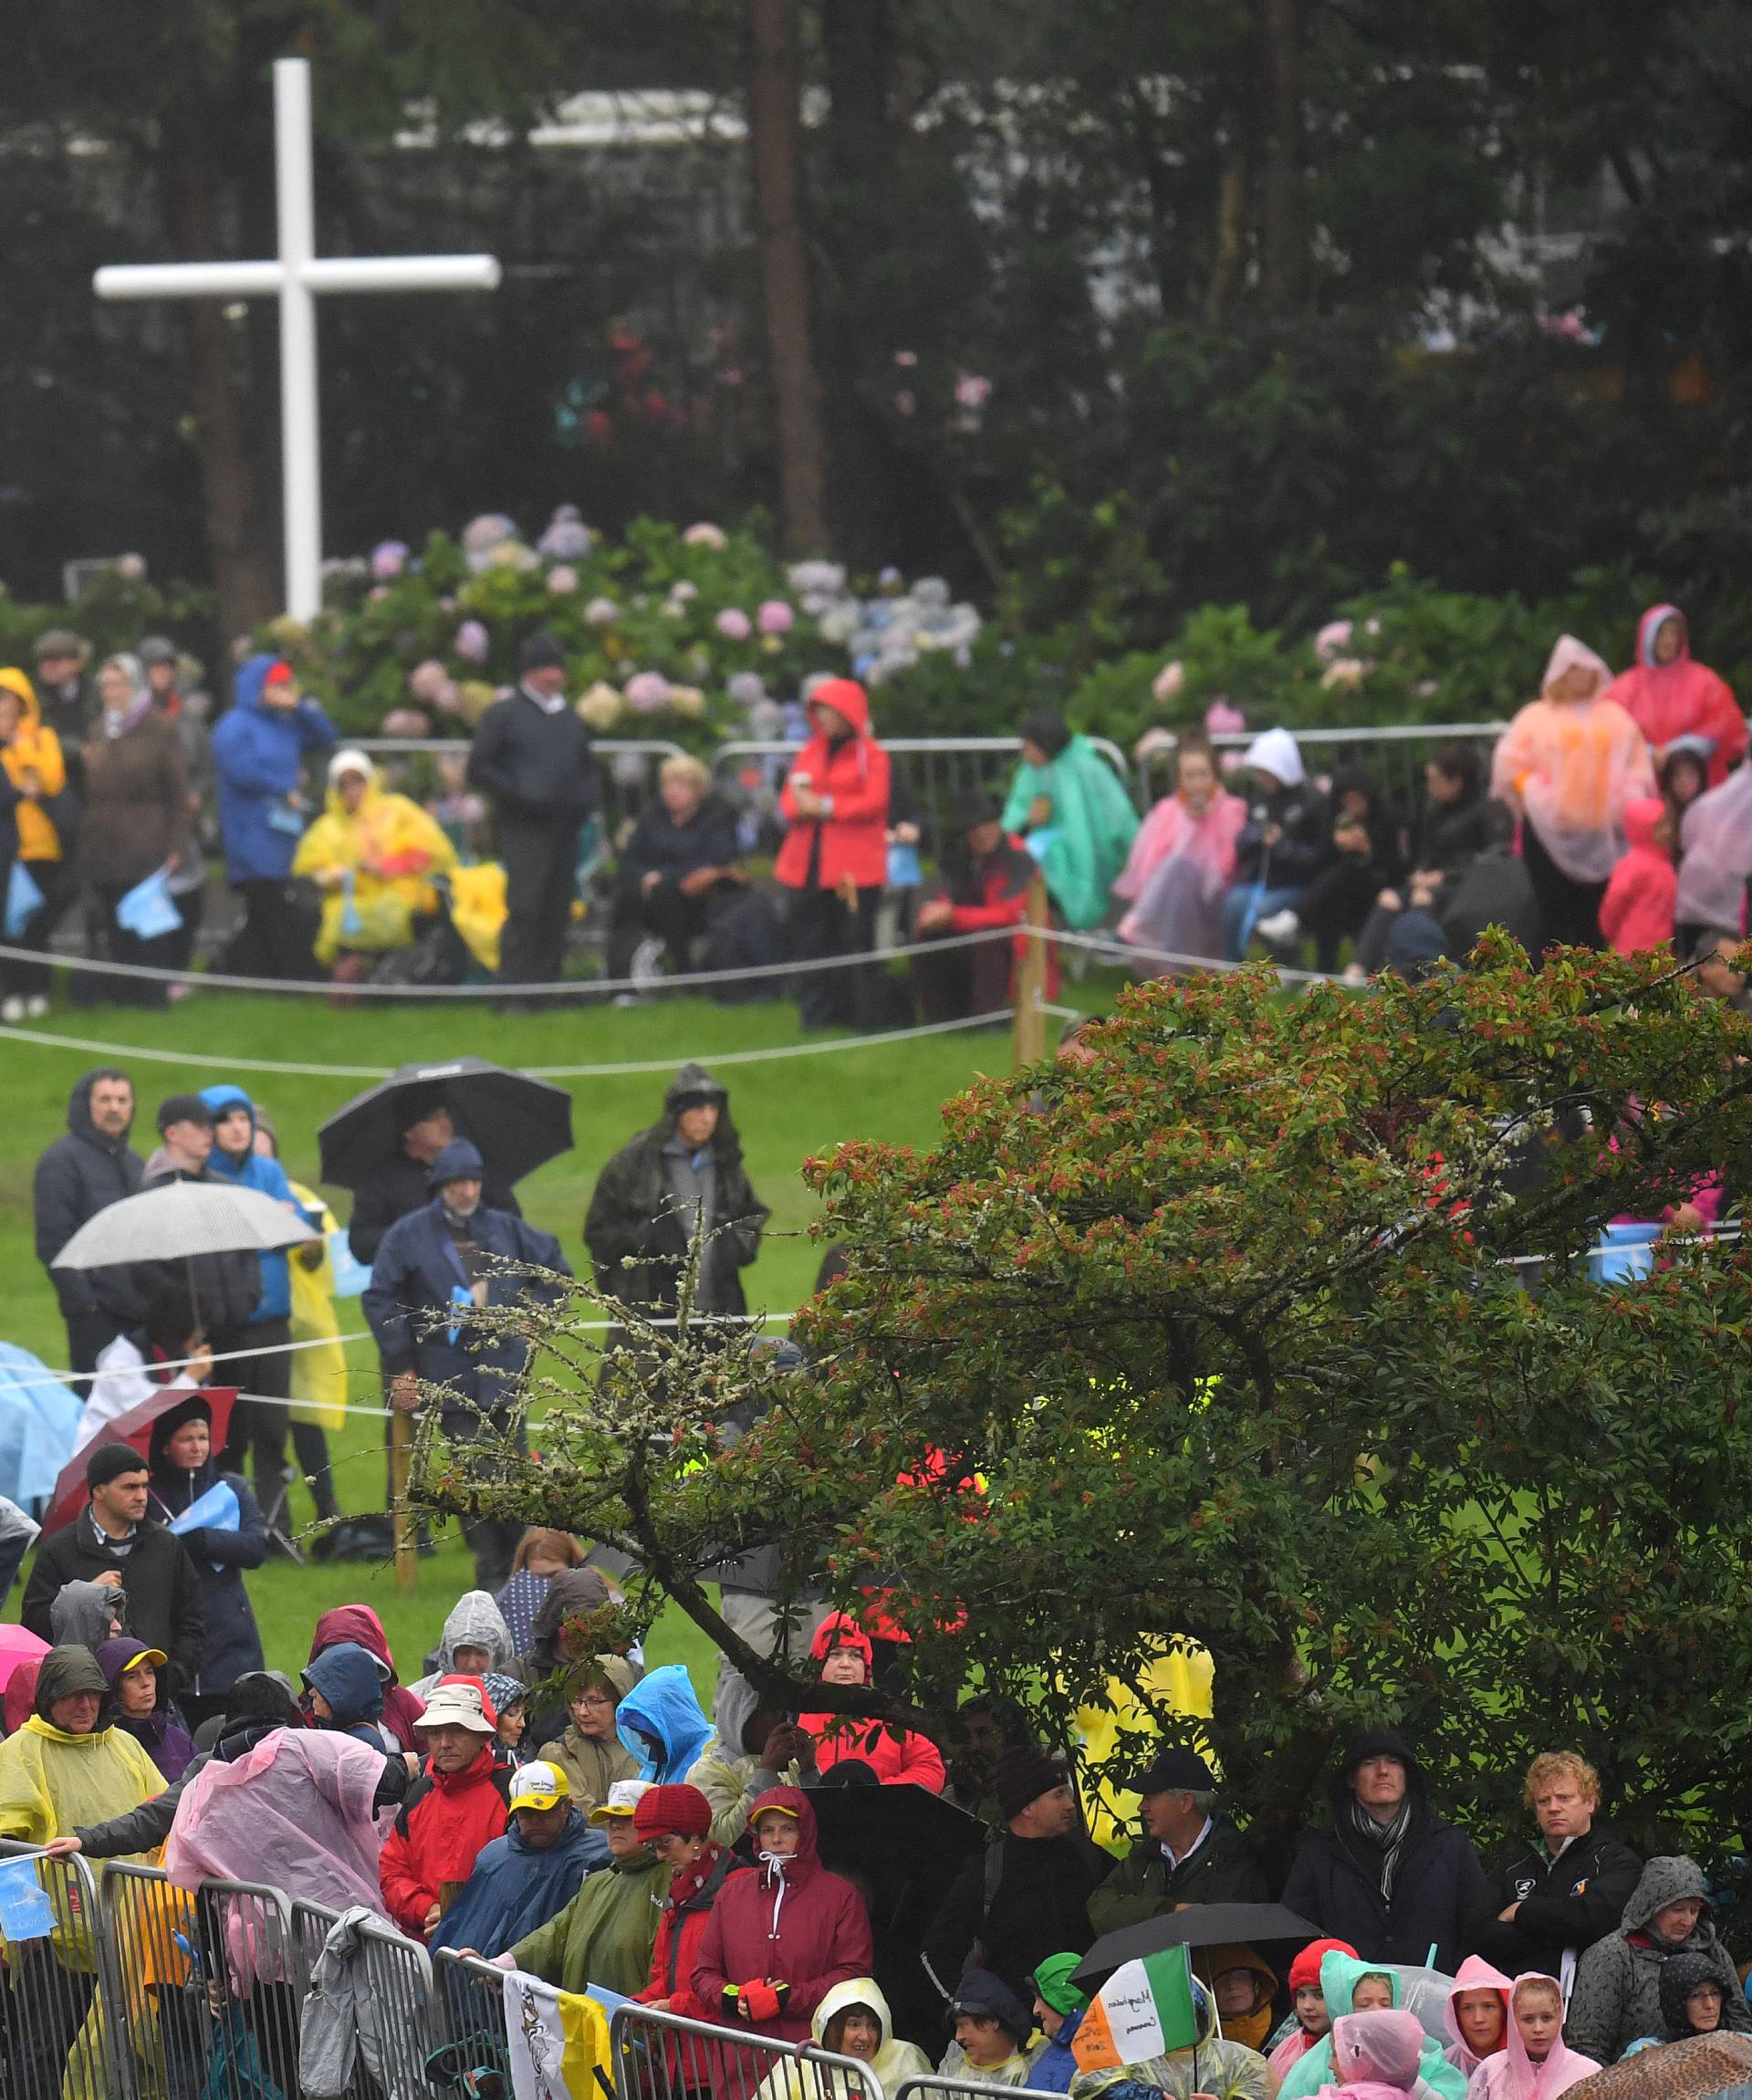 The faithful wait in the rain ahead of a visit of Pope Francis to Knock Shrine in Knock